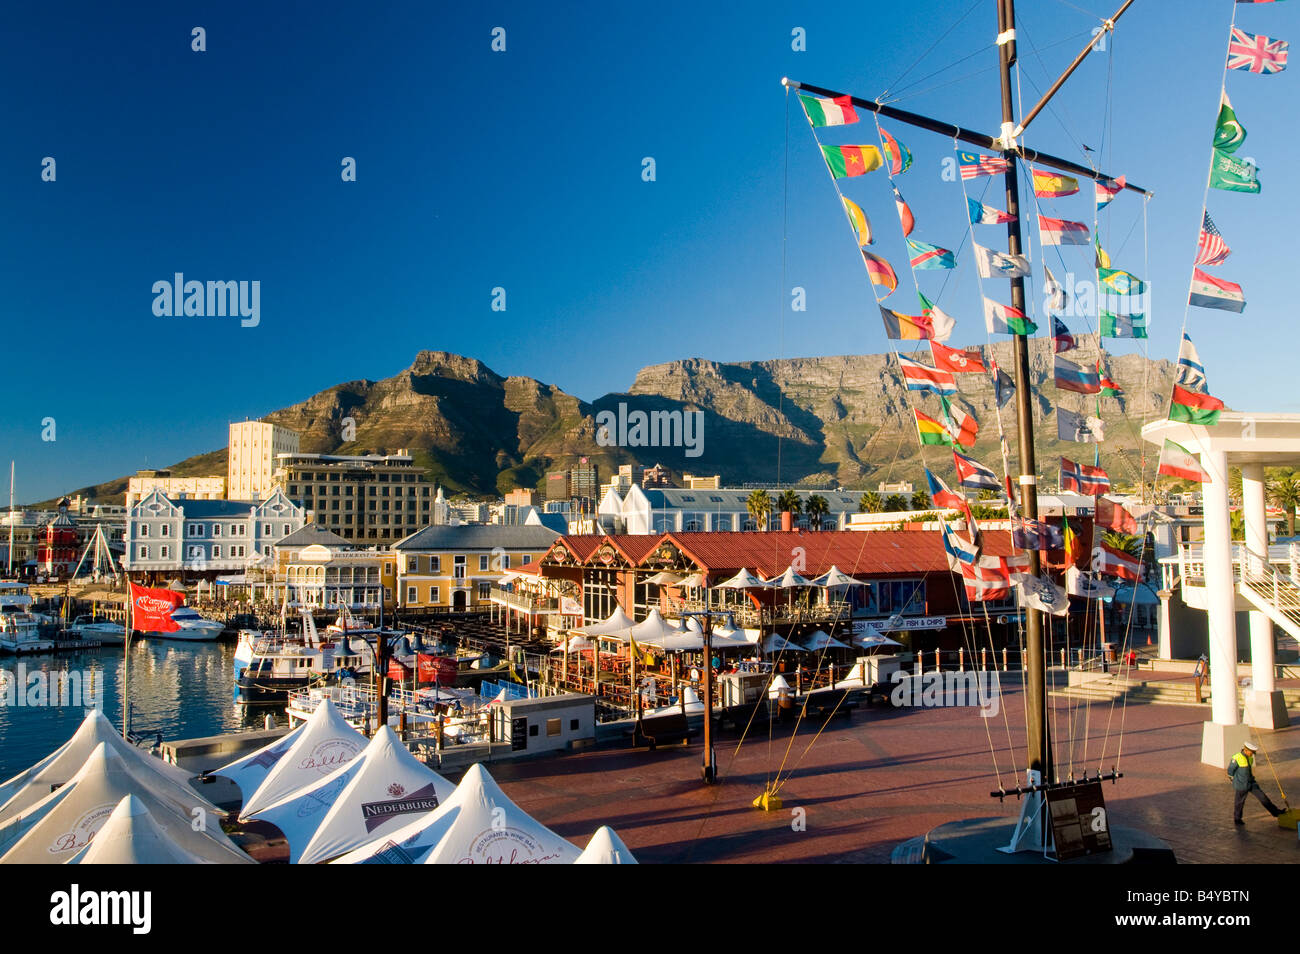 Waterfront, Table Mountain, Cape Town, Western Cape, South Africa Stock Photo